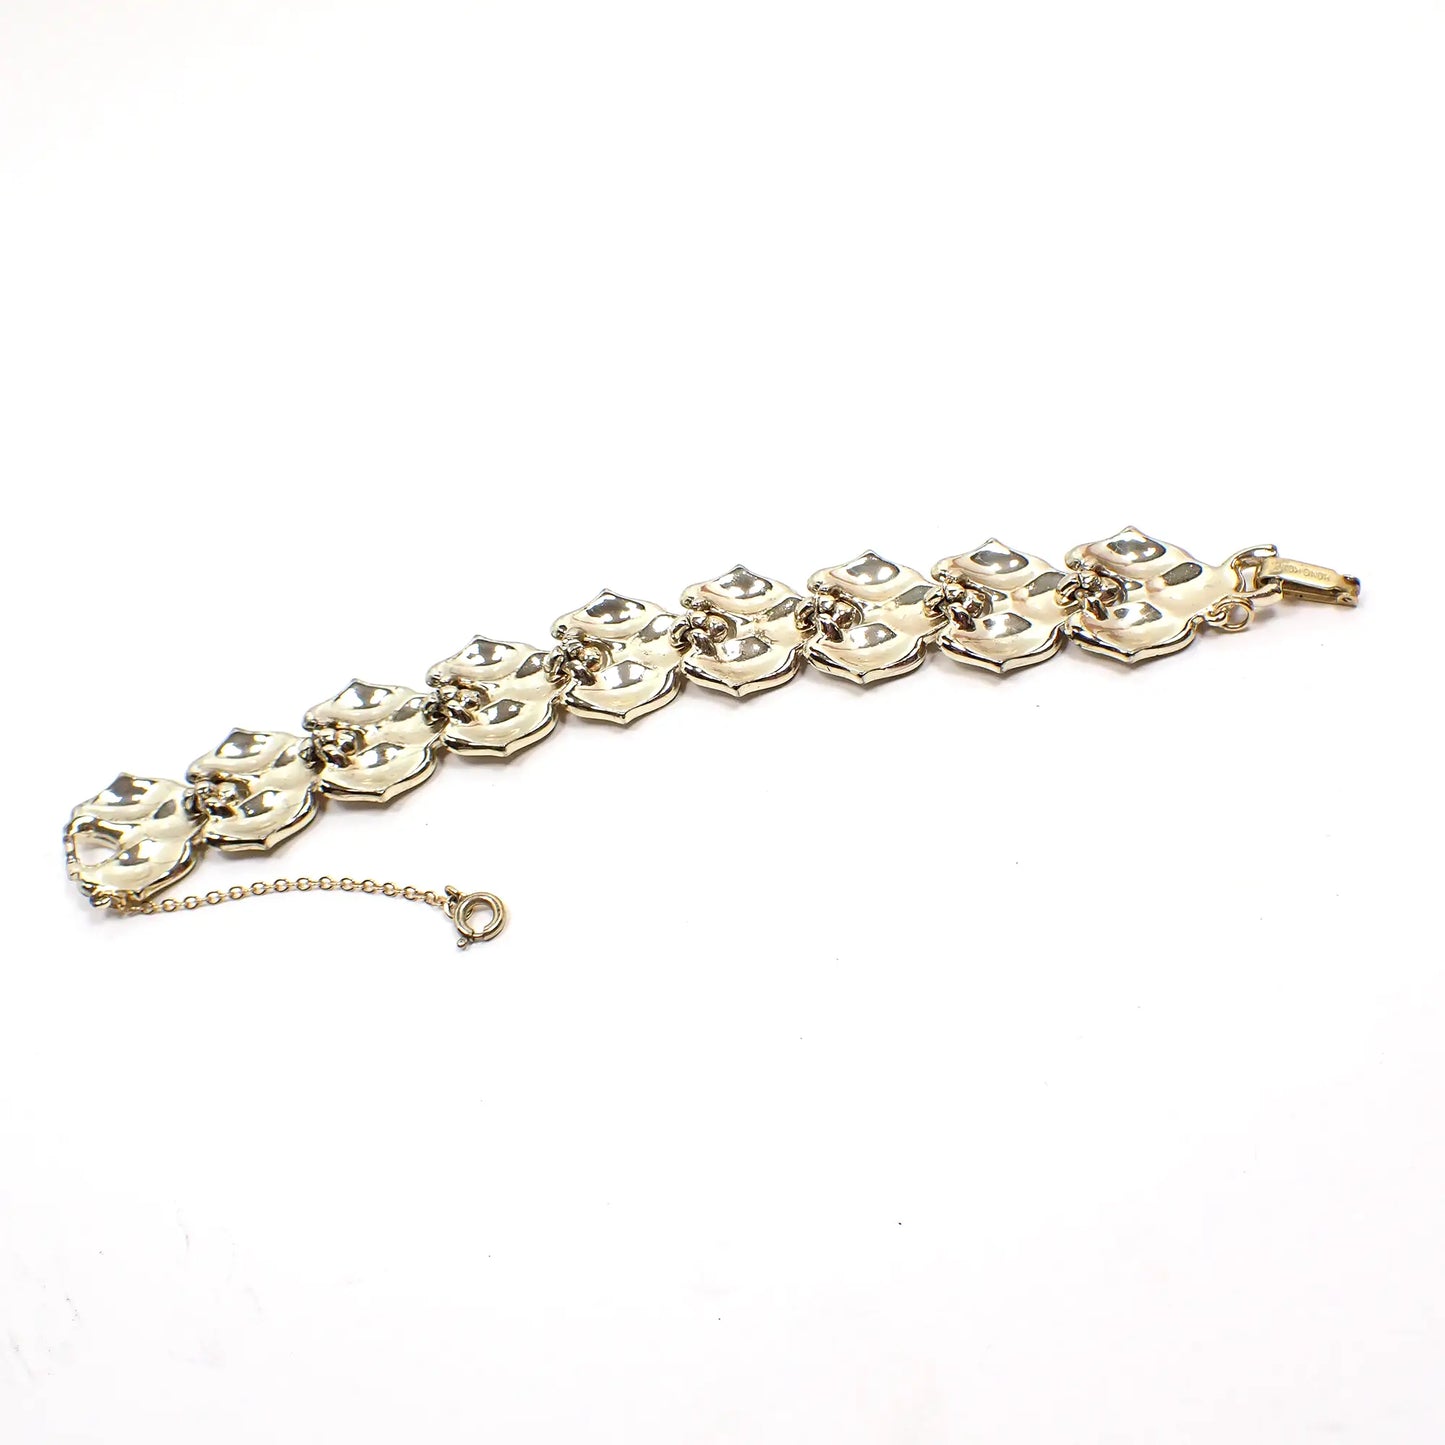 1960's Hong Kong Vintage Link Bracelet with Safety Chain